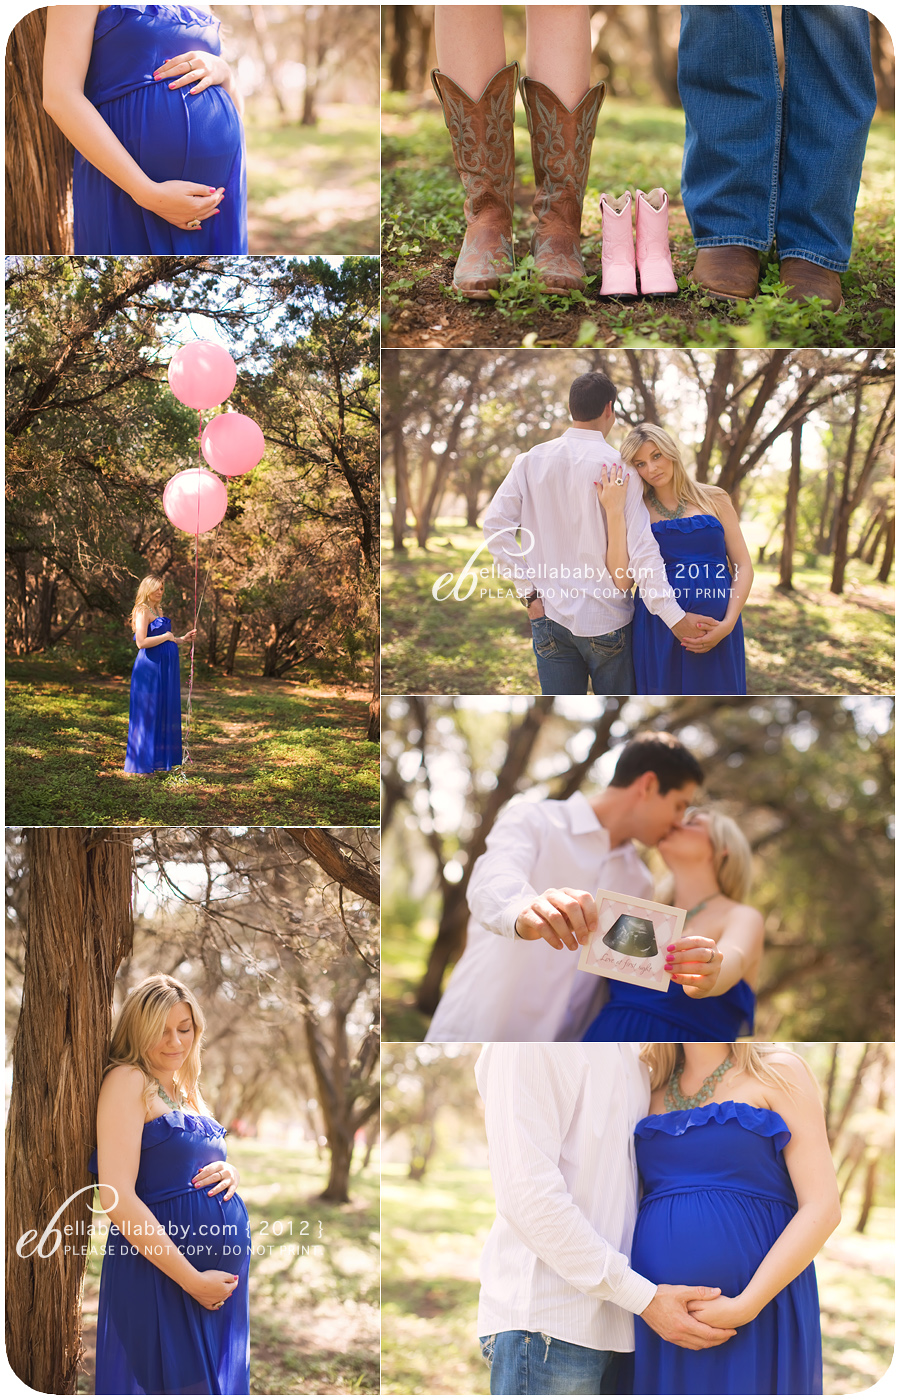 Maternity Poses” – Searching for Images that Inspire – Dallas Maternity  Photographer – CLJ Photography - CLJ Photo